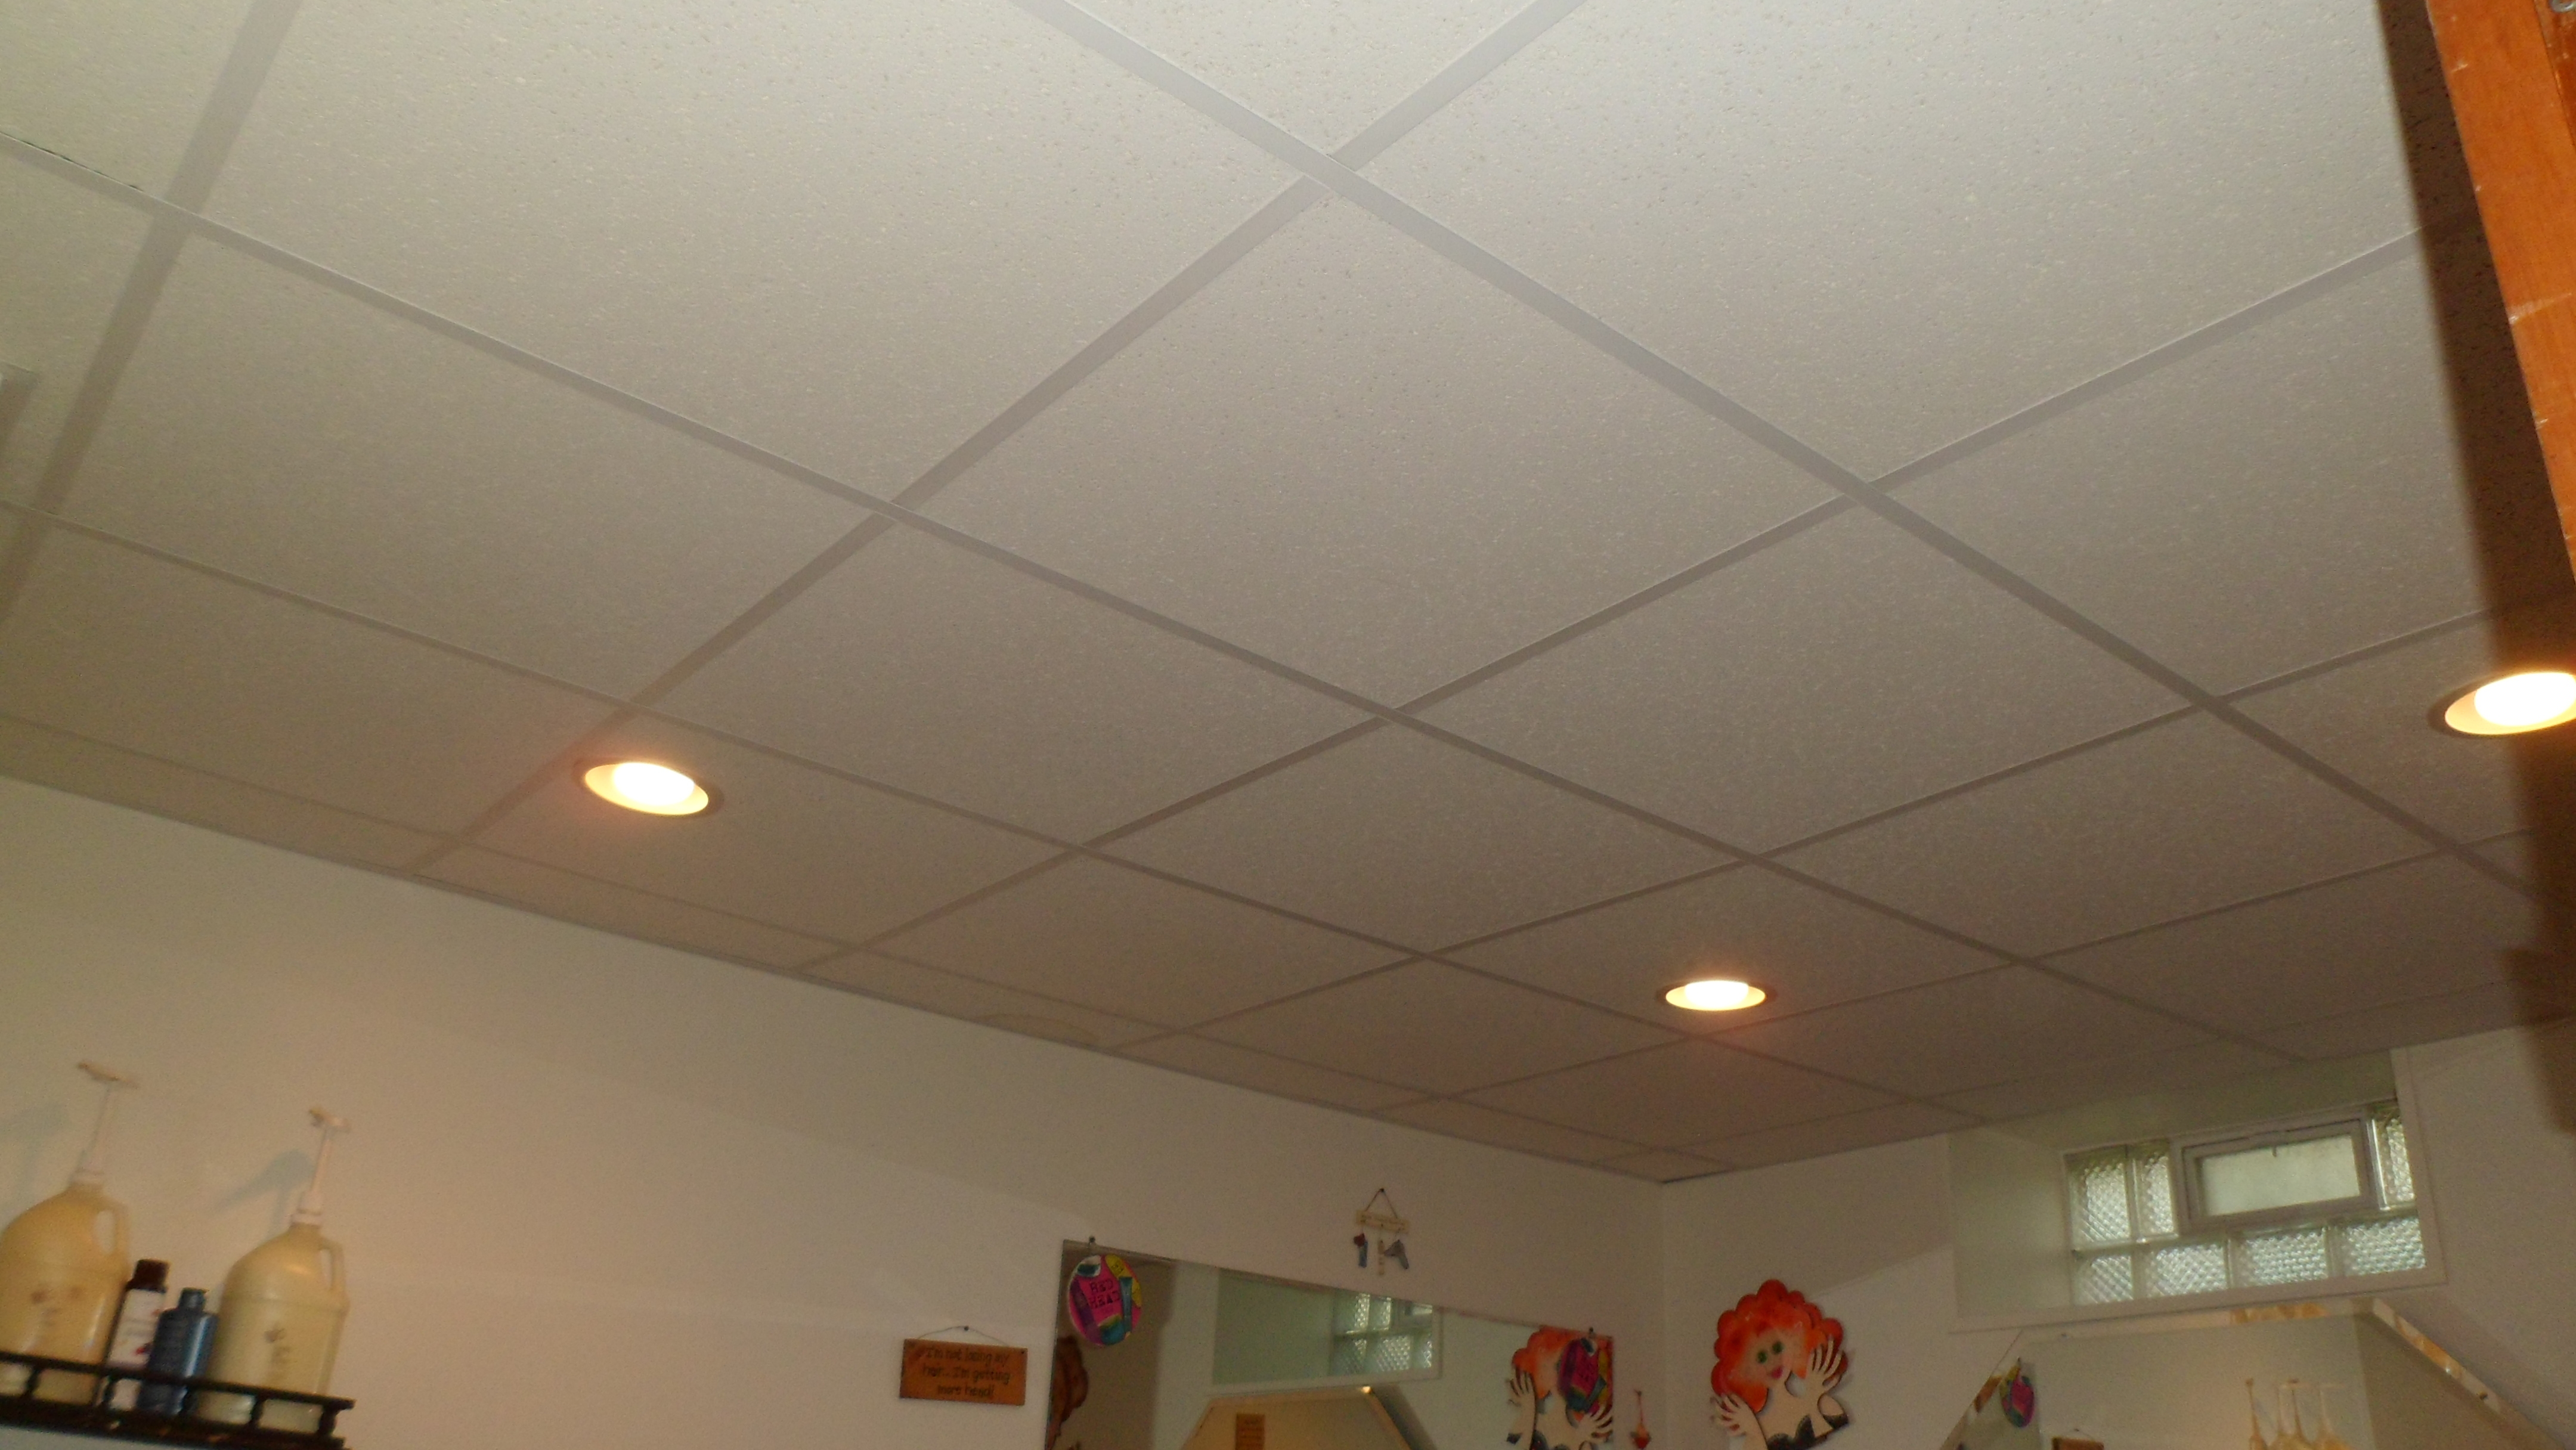 Permalink to Can Lights For Drop Ceilings